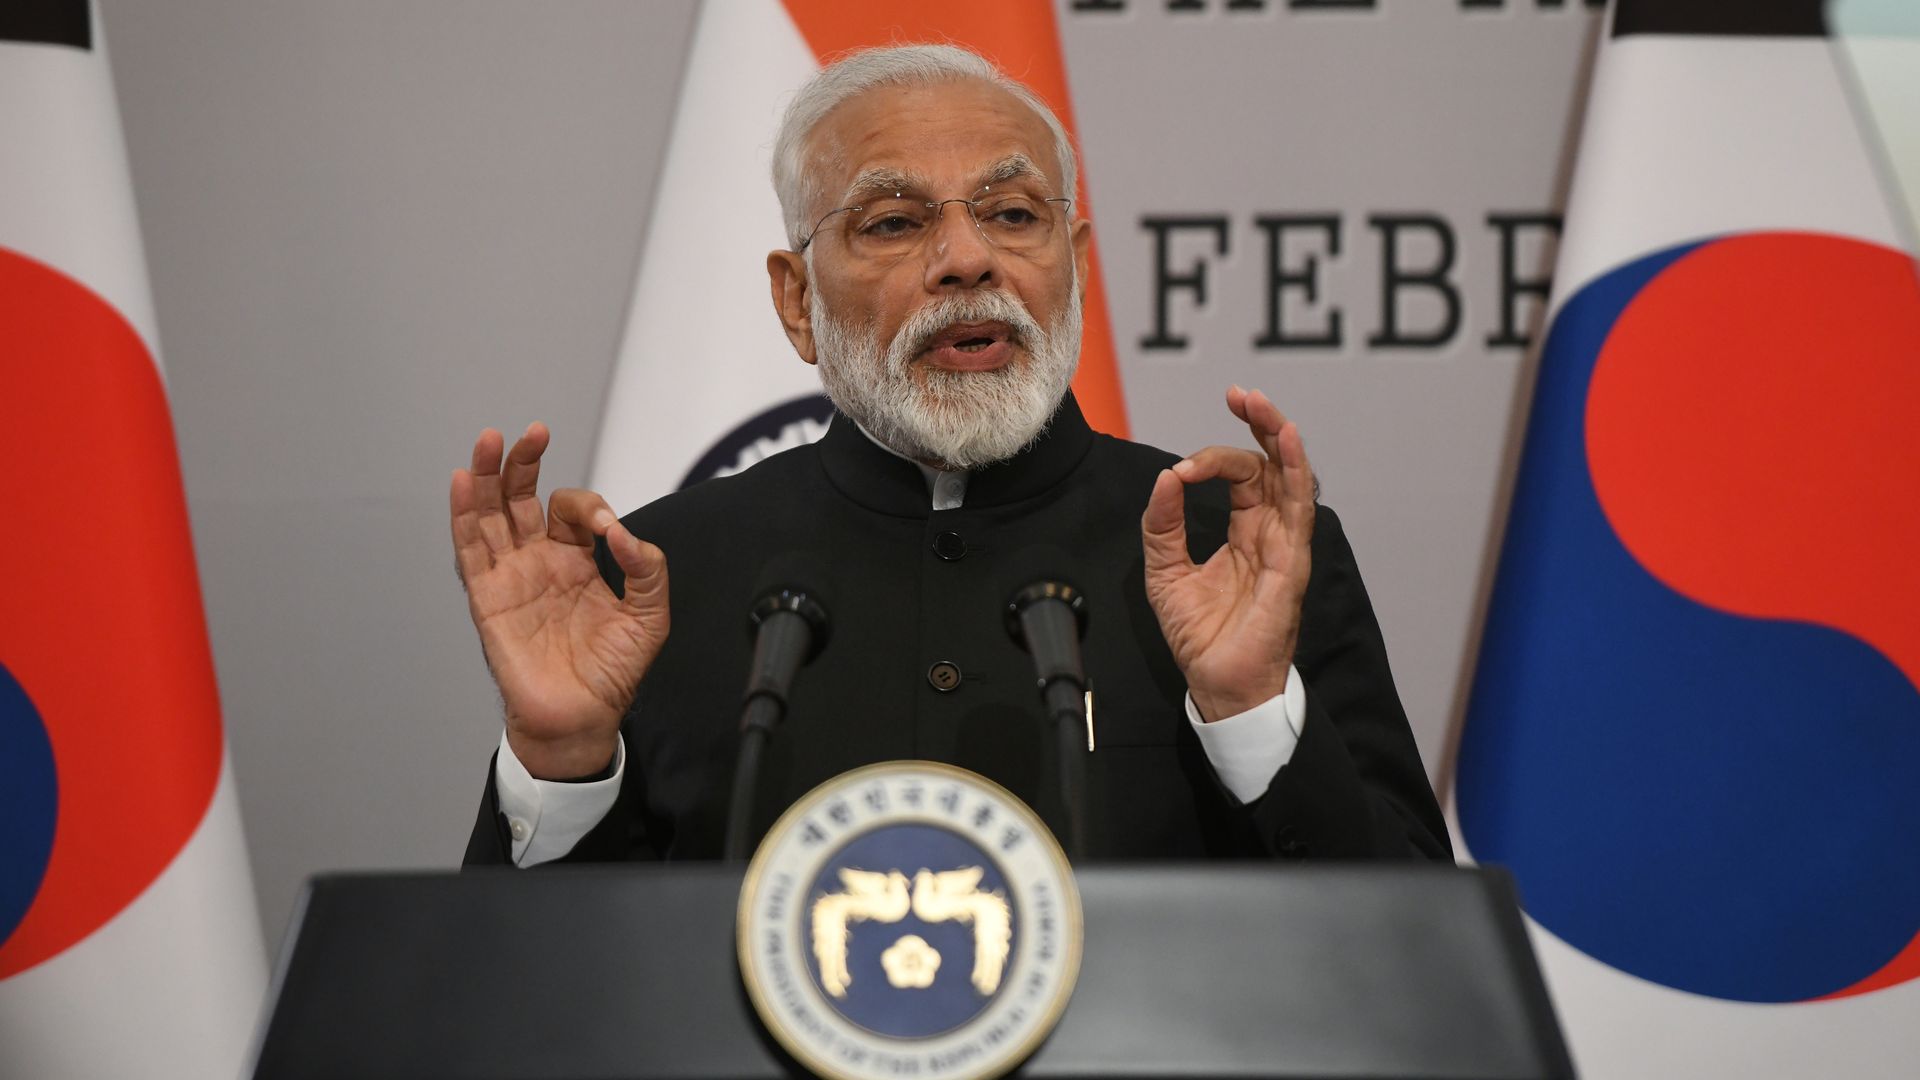 India's Prime Minister Narendra Modi says the country has shot down a satellite in space.